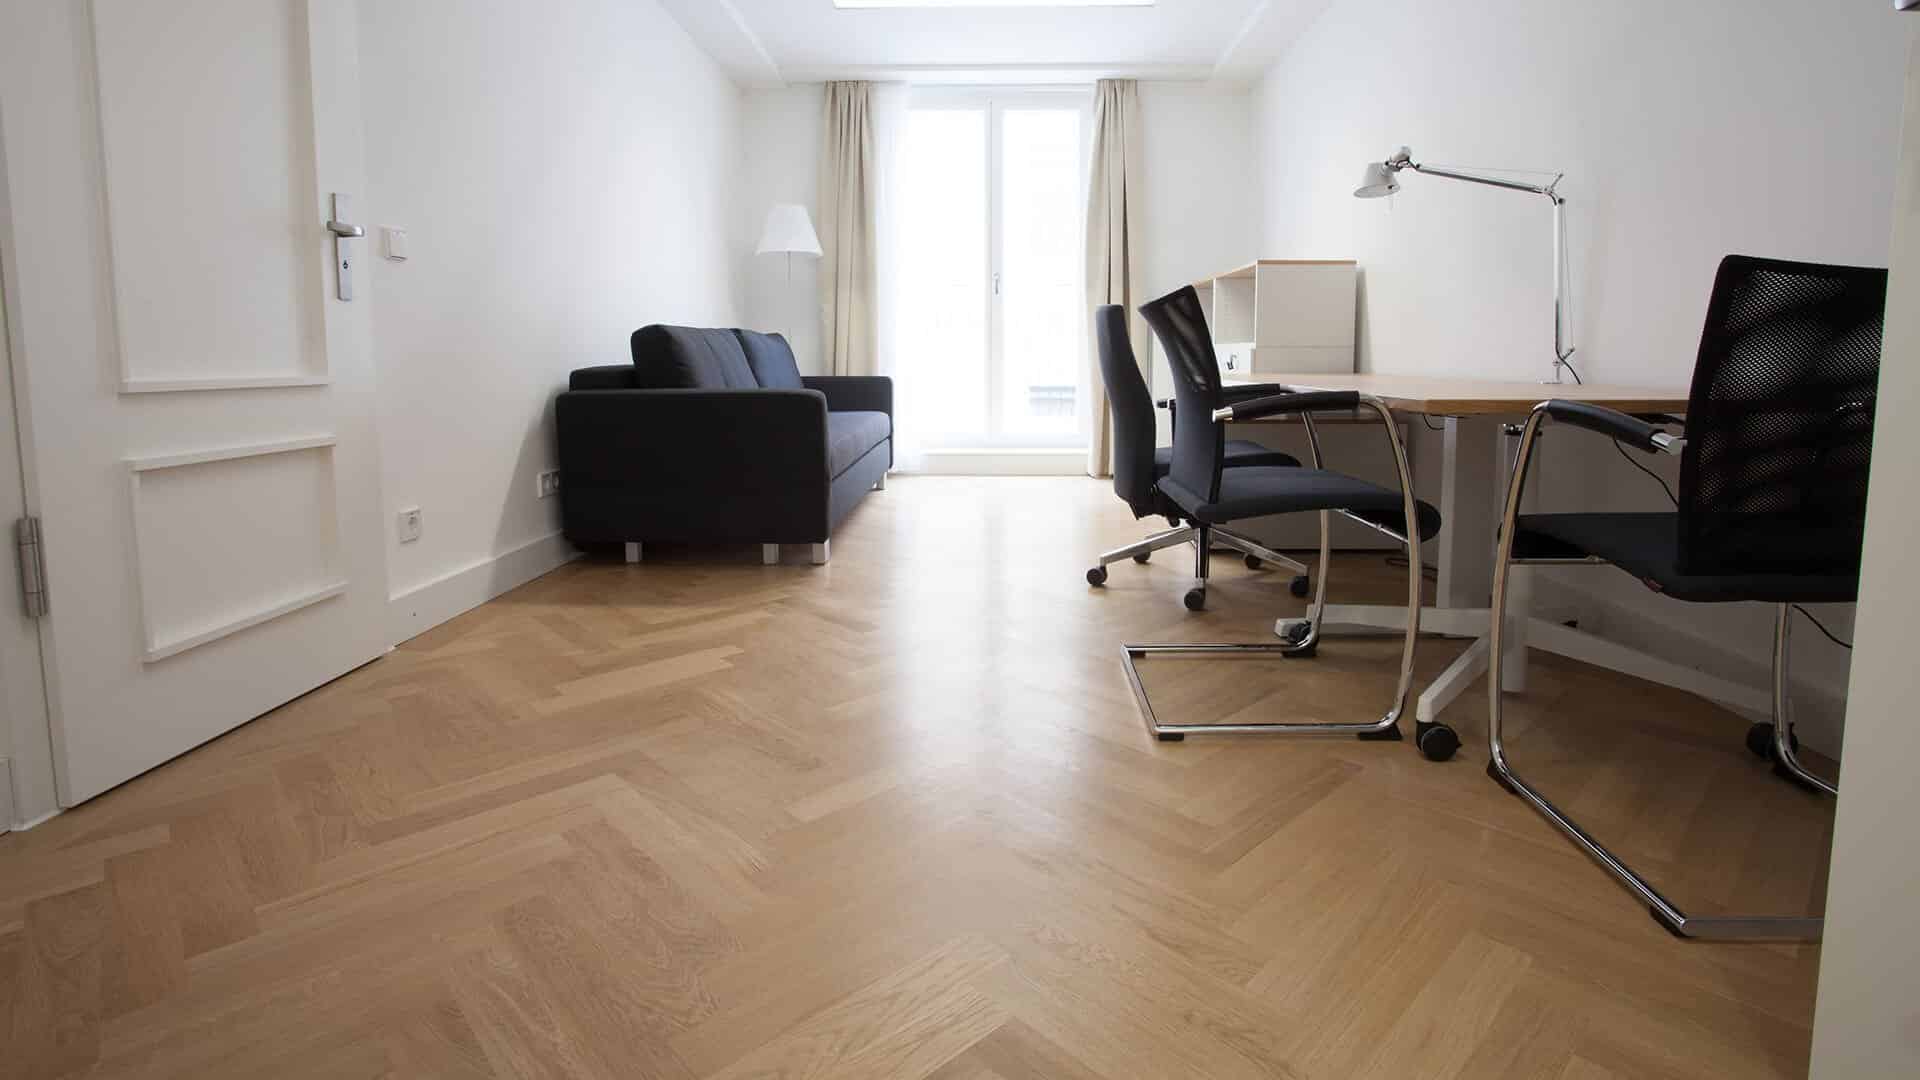 Solid parquet sofa laid in an office